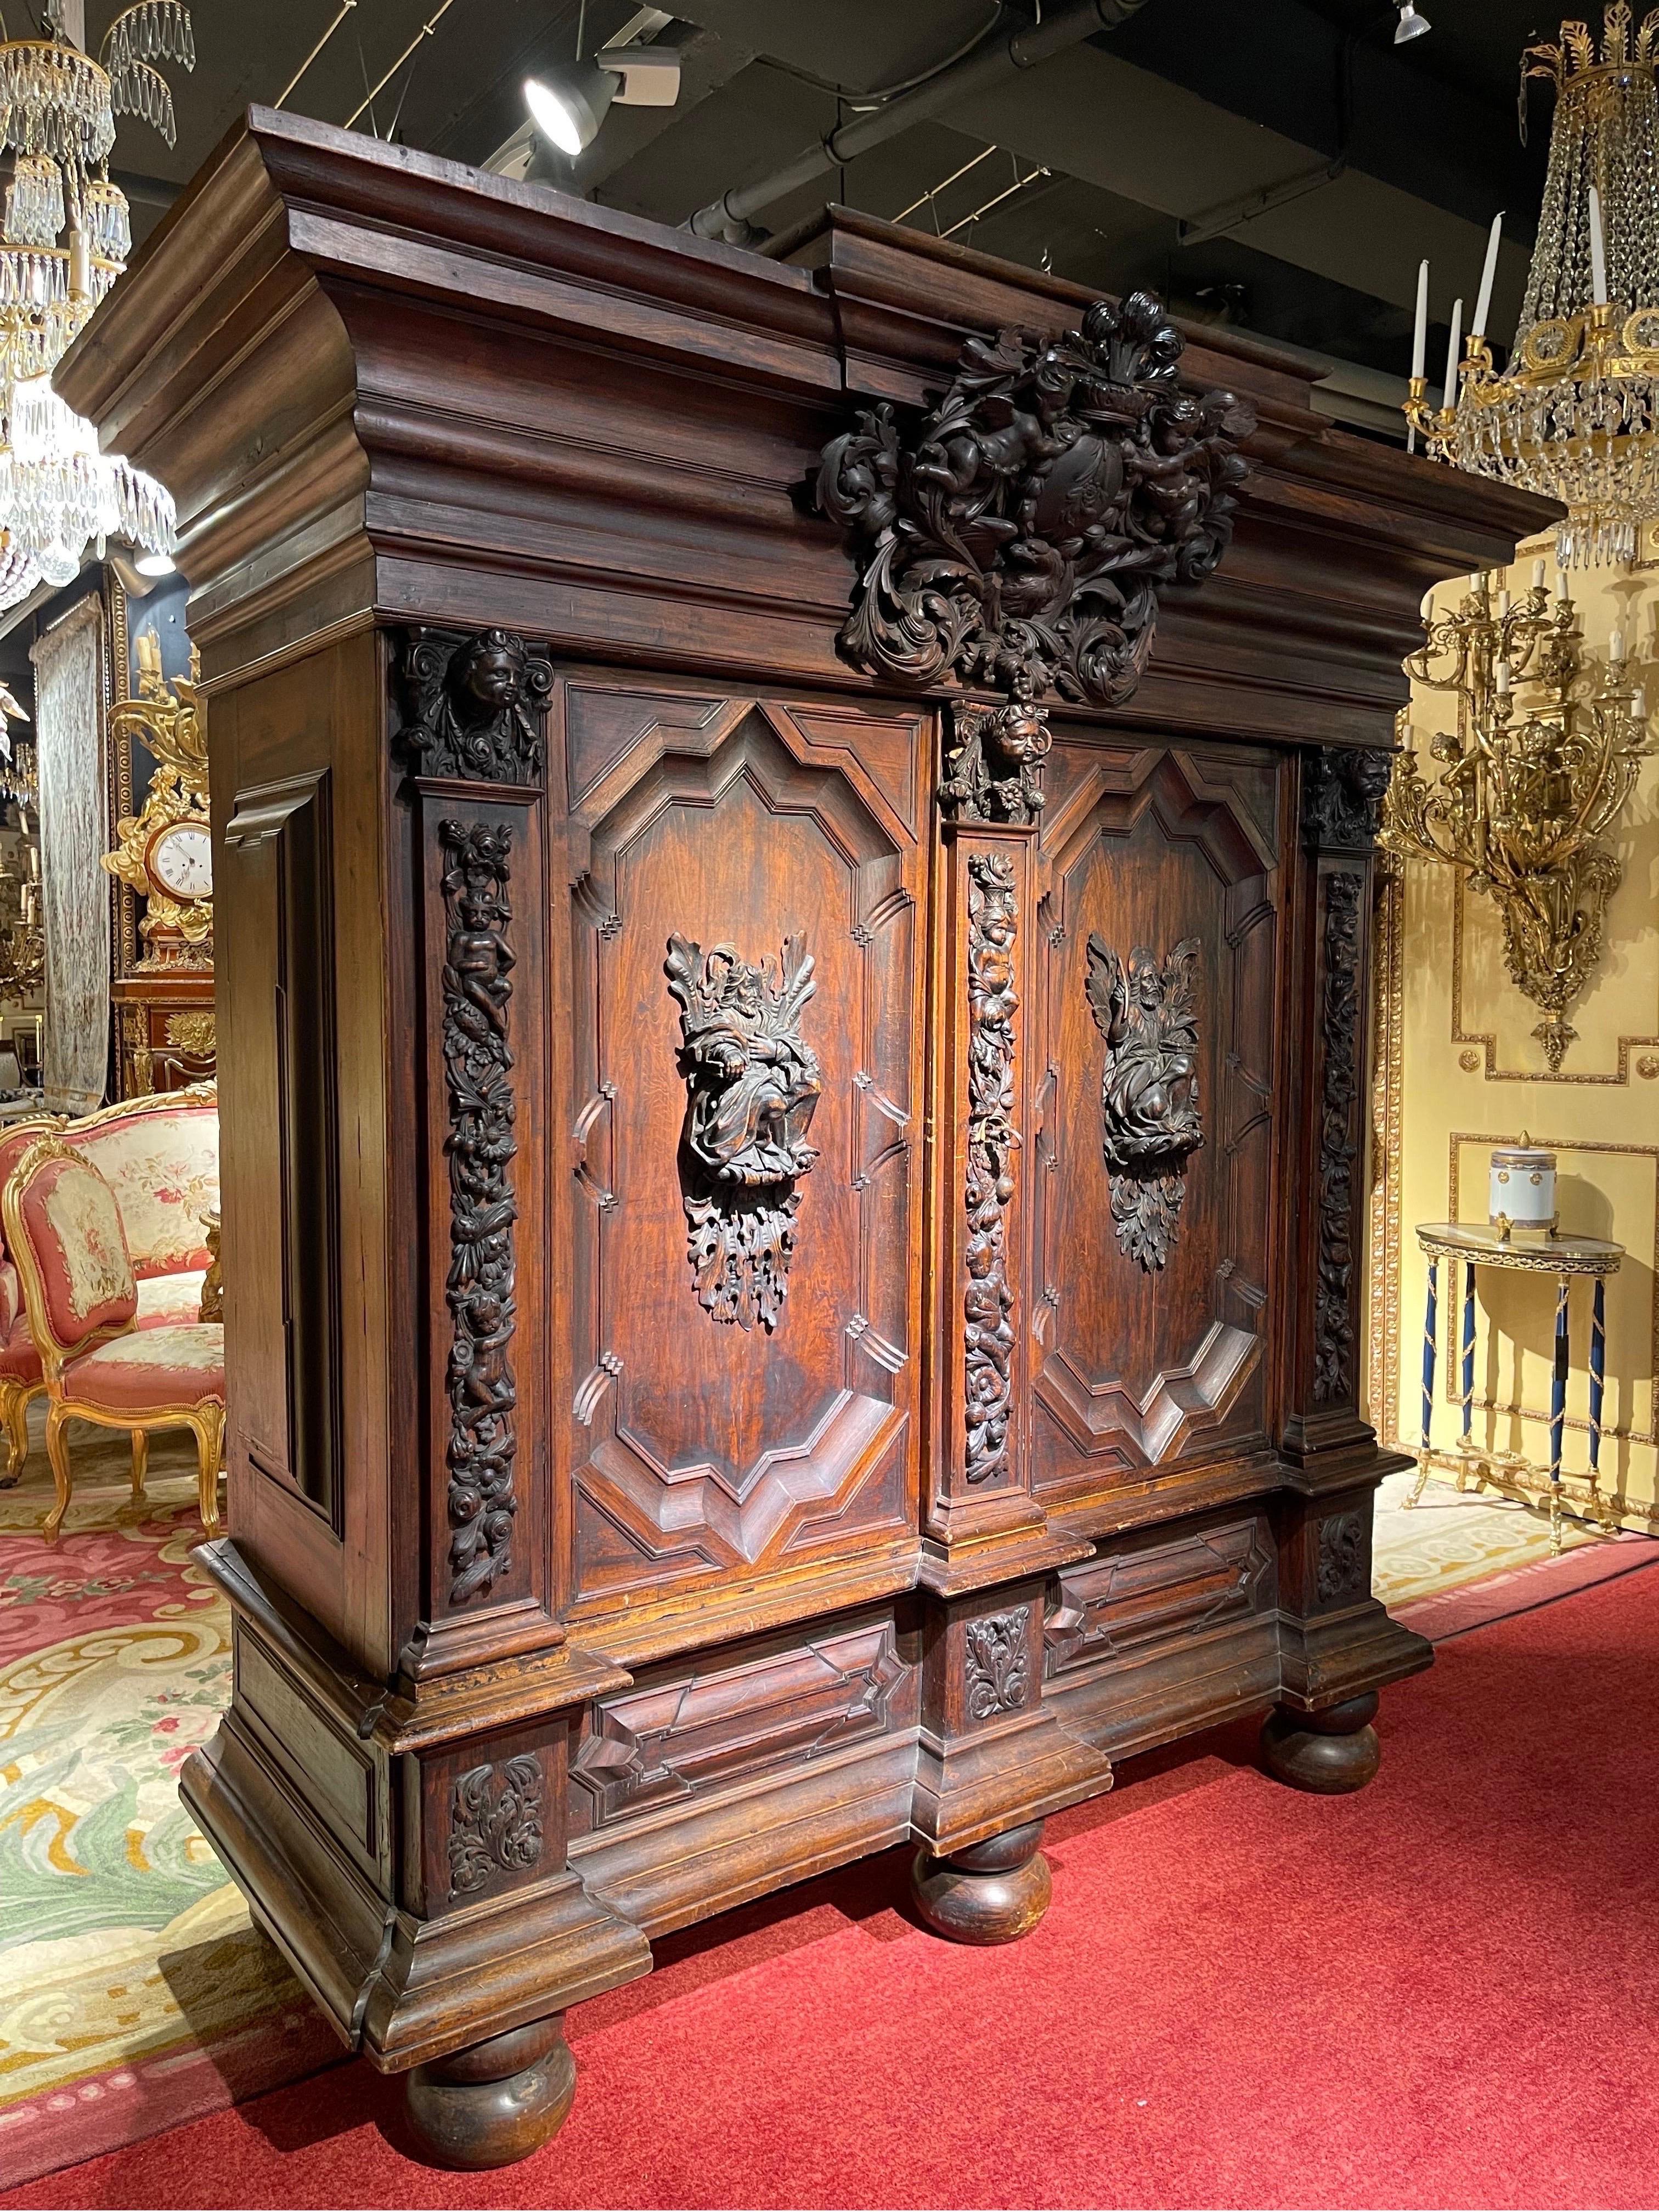 Monumental baroque cabinet, oak, around 1720, North German


High rectangular body made of solid oak body with multi-profiled cornice. In the middle a richly decorated and ornate relief with puttis. Two doors with original box lock and original key.